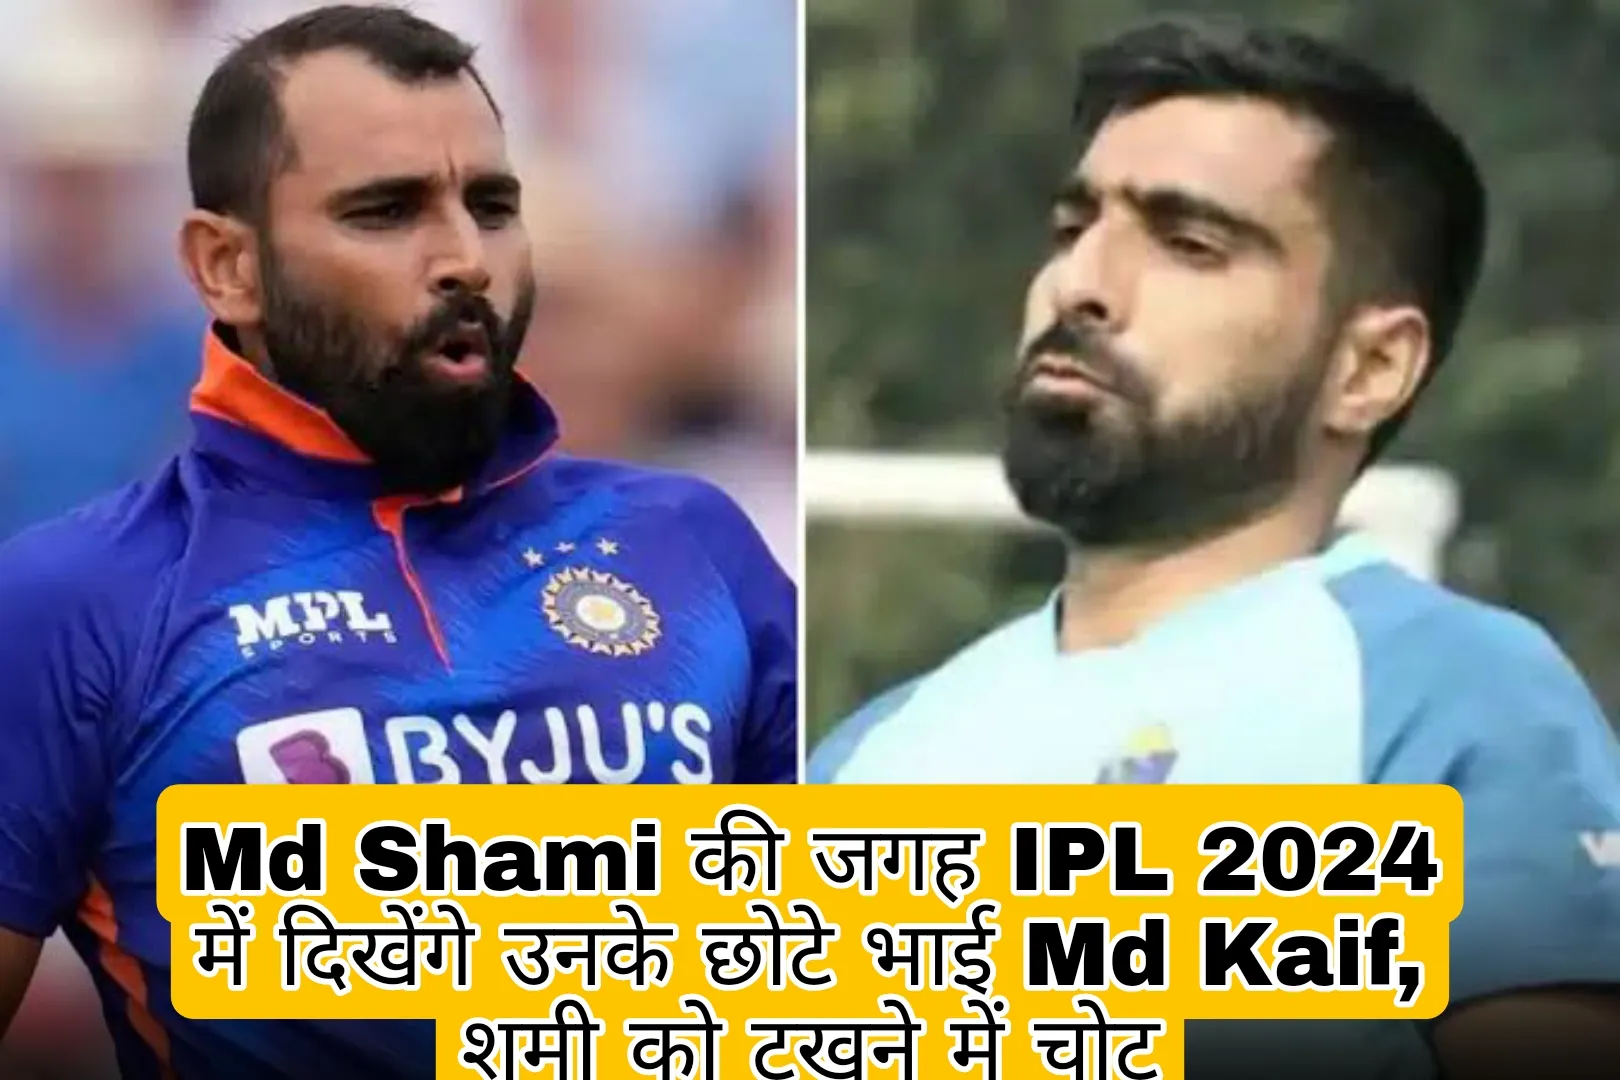 Md Kaif will replace Md Shami in IPL 2024